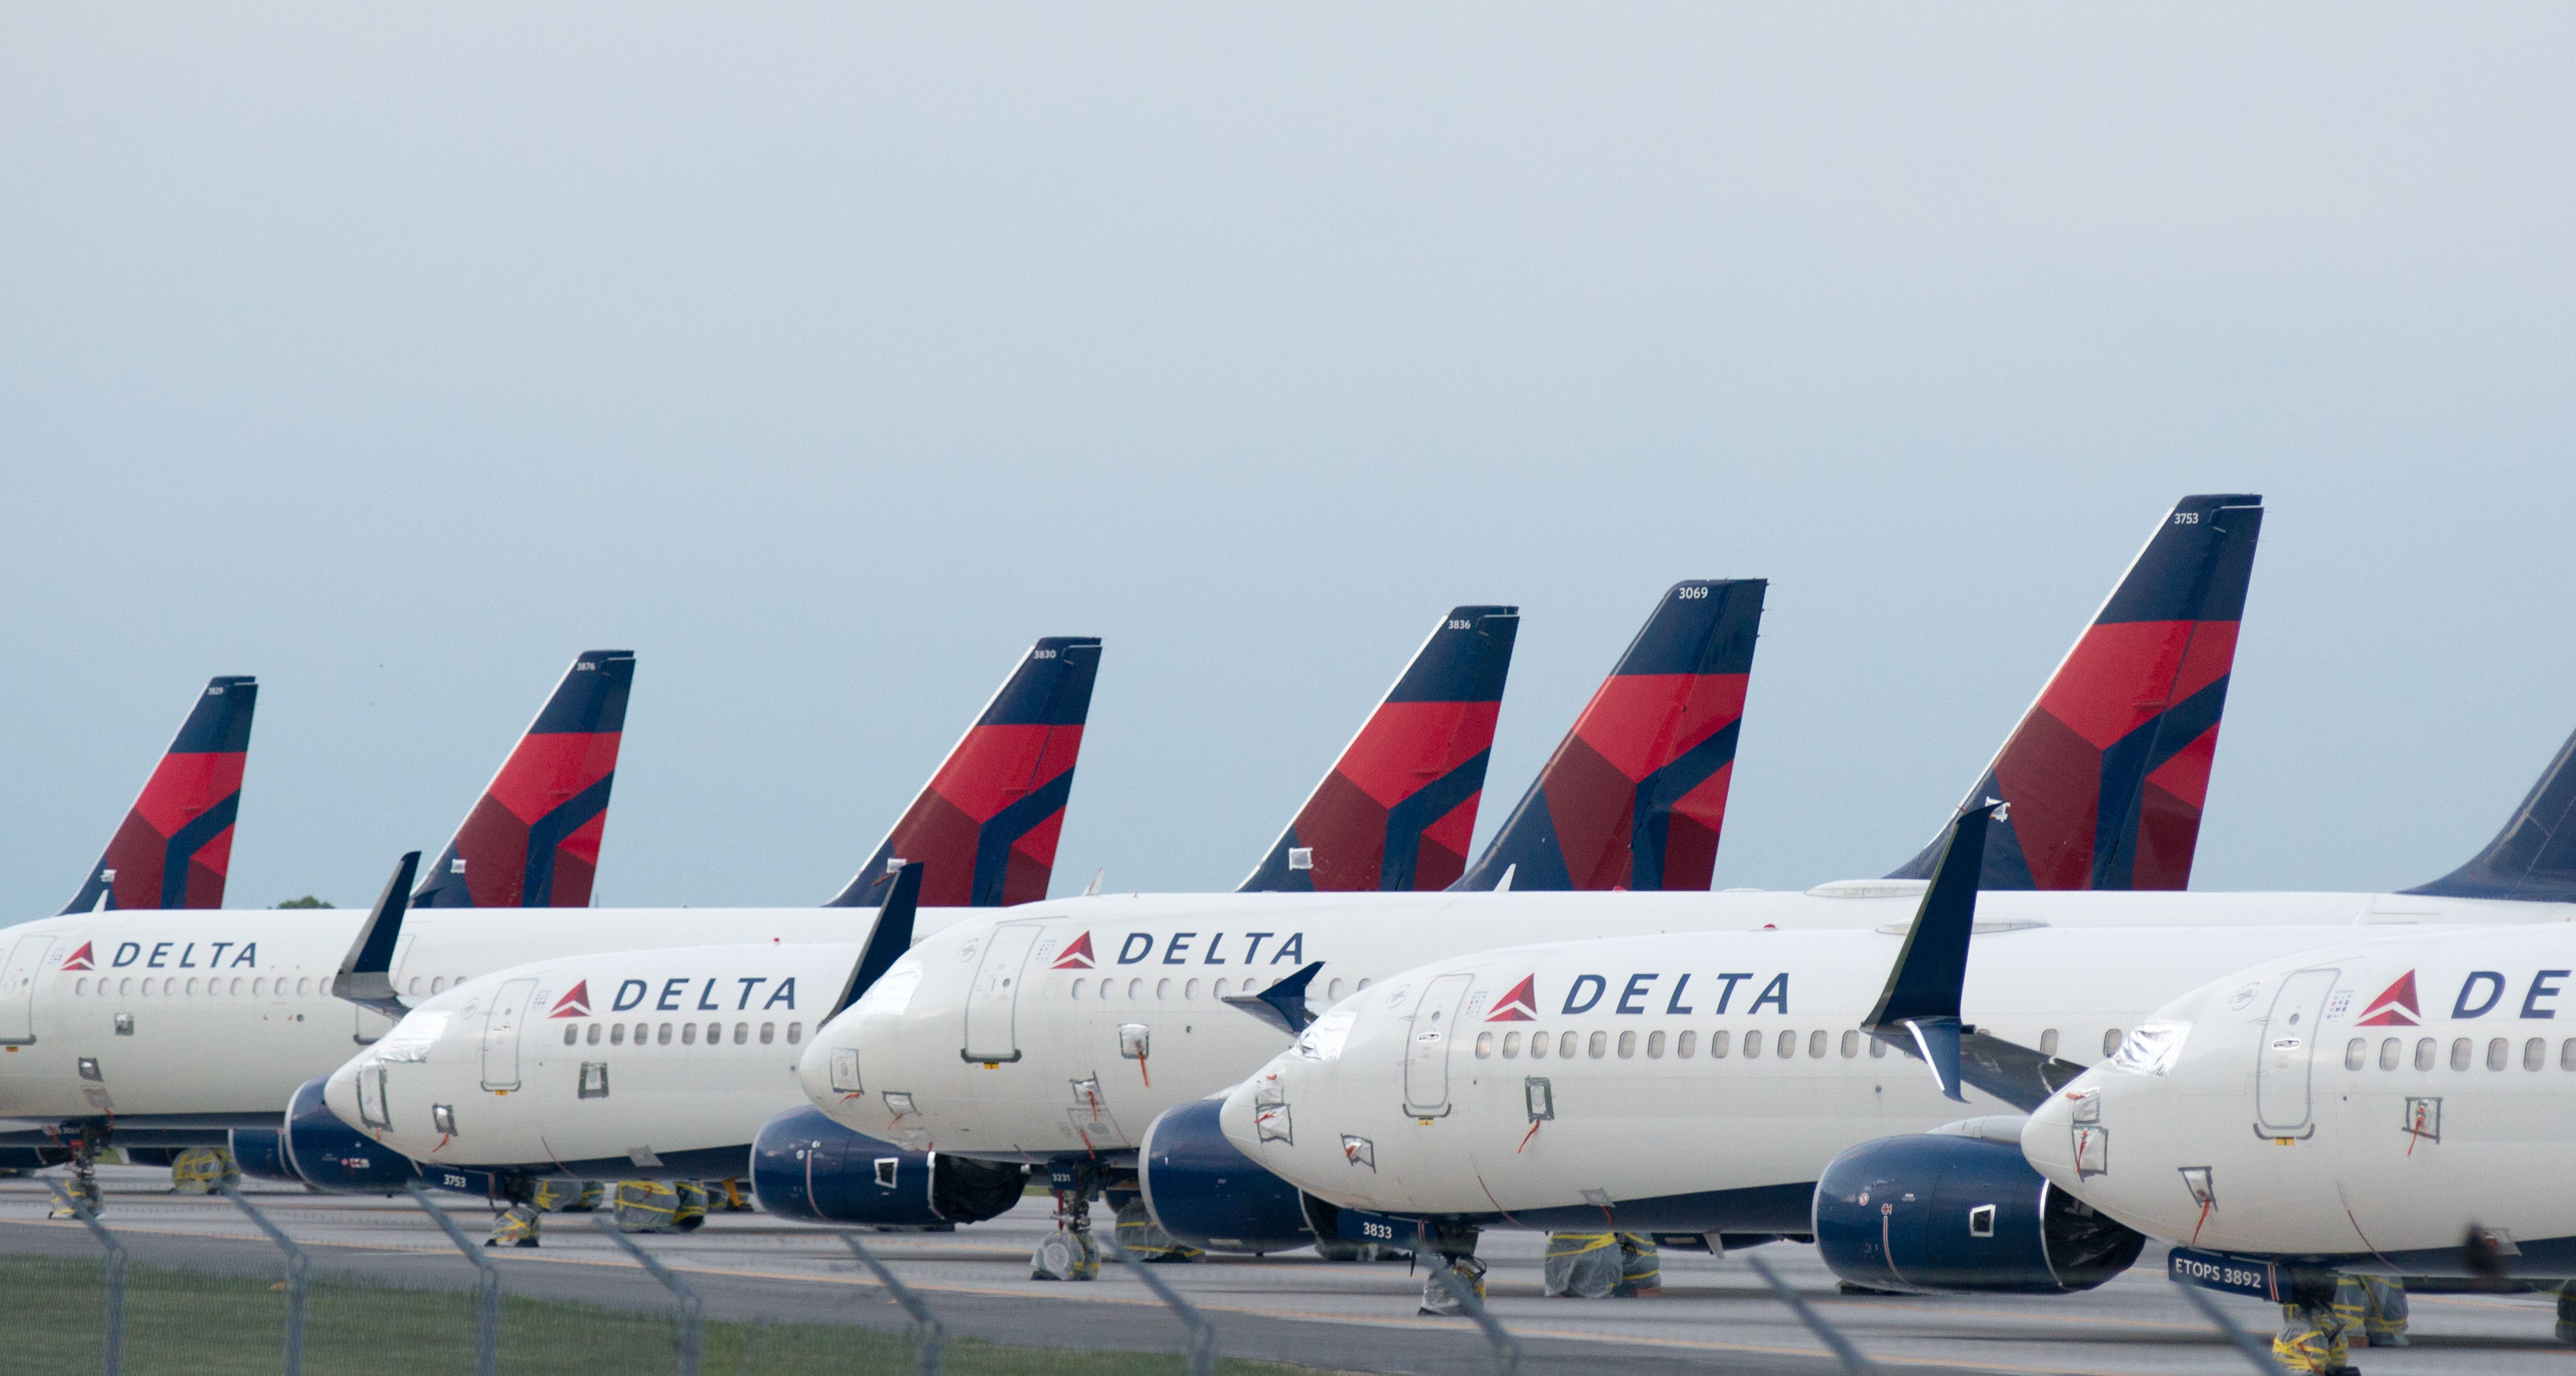 Many Delta Air Lines Boeing 737s Parked side by side.